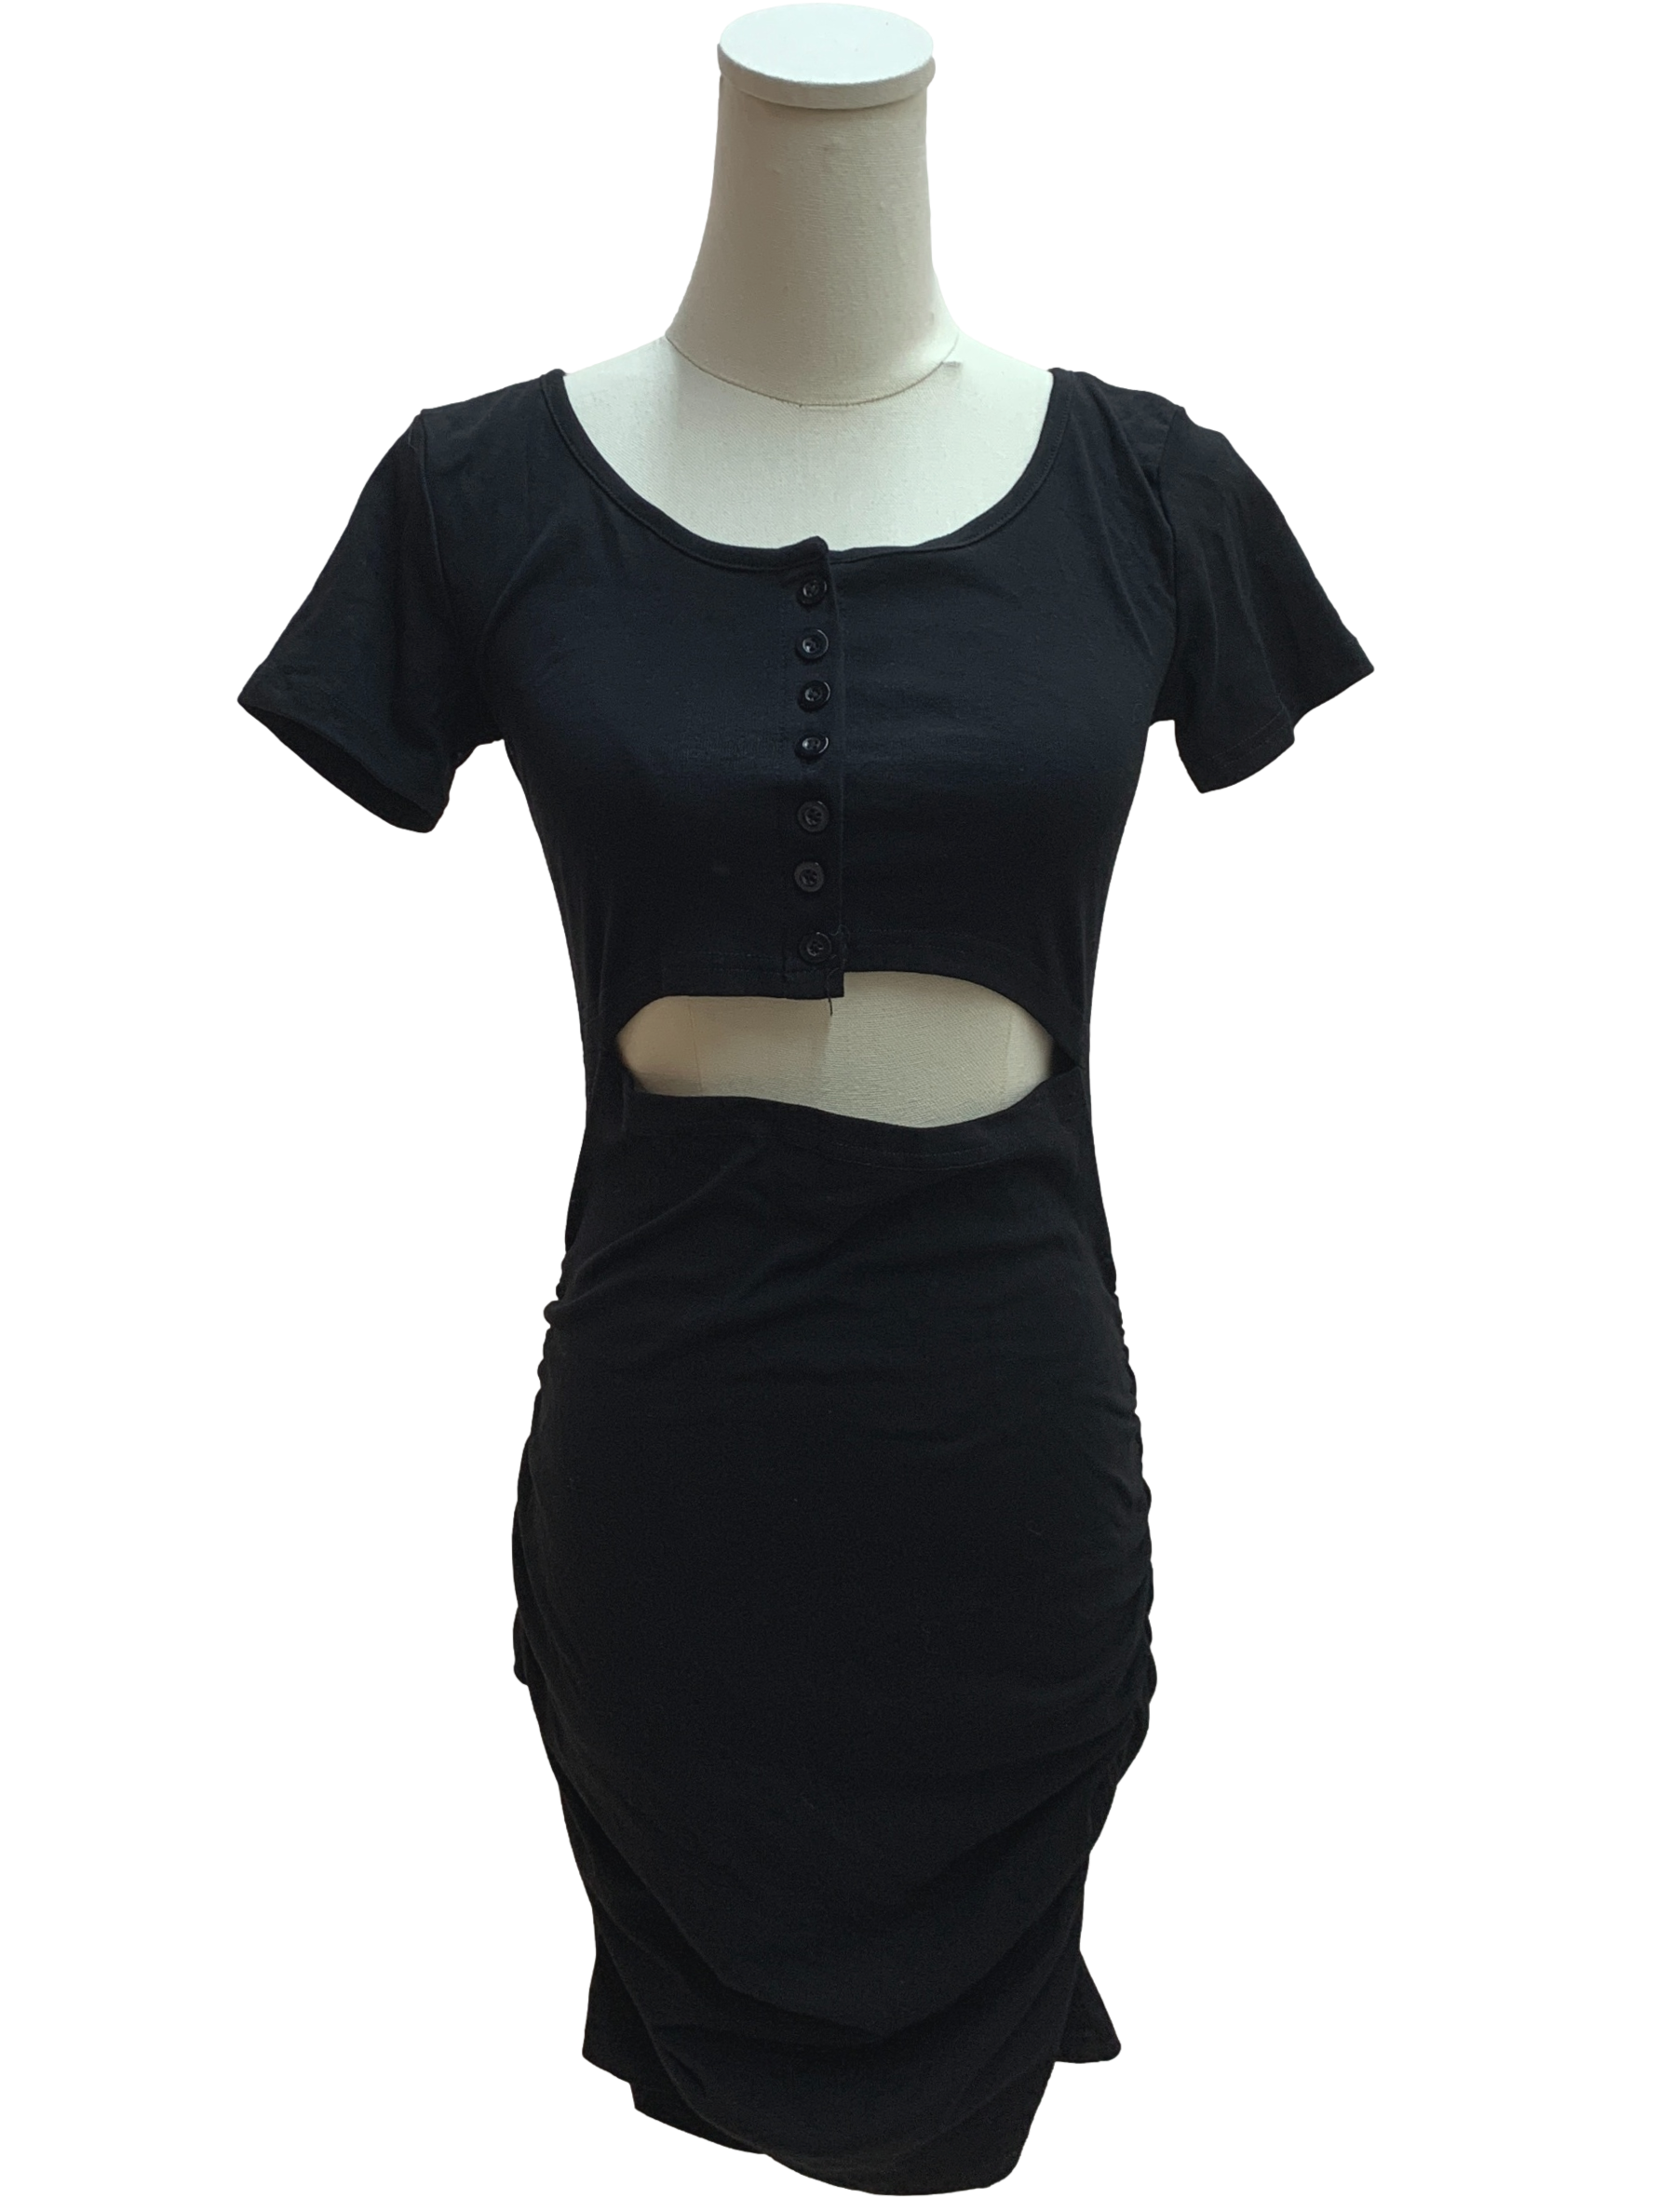 Pitch Black Ruched Dress